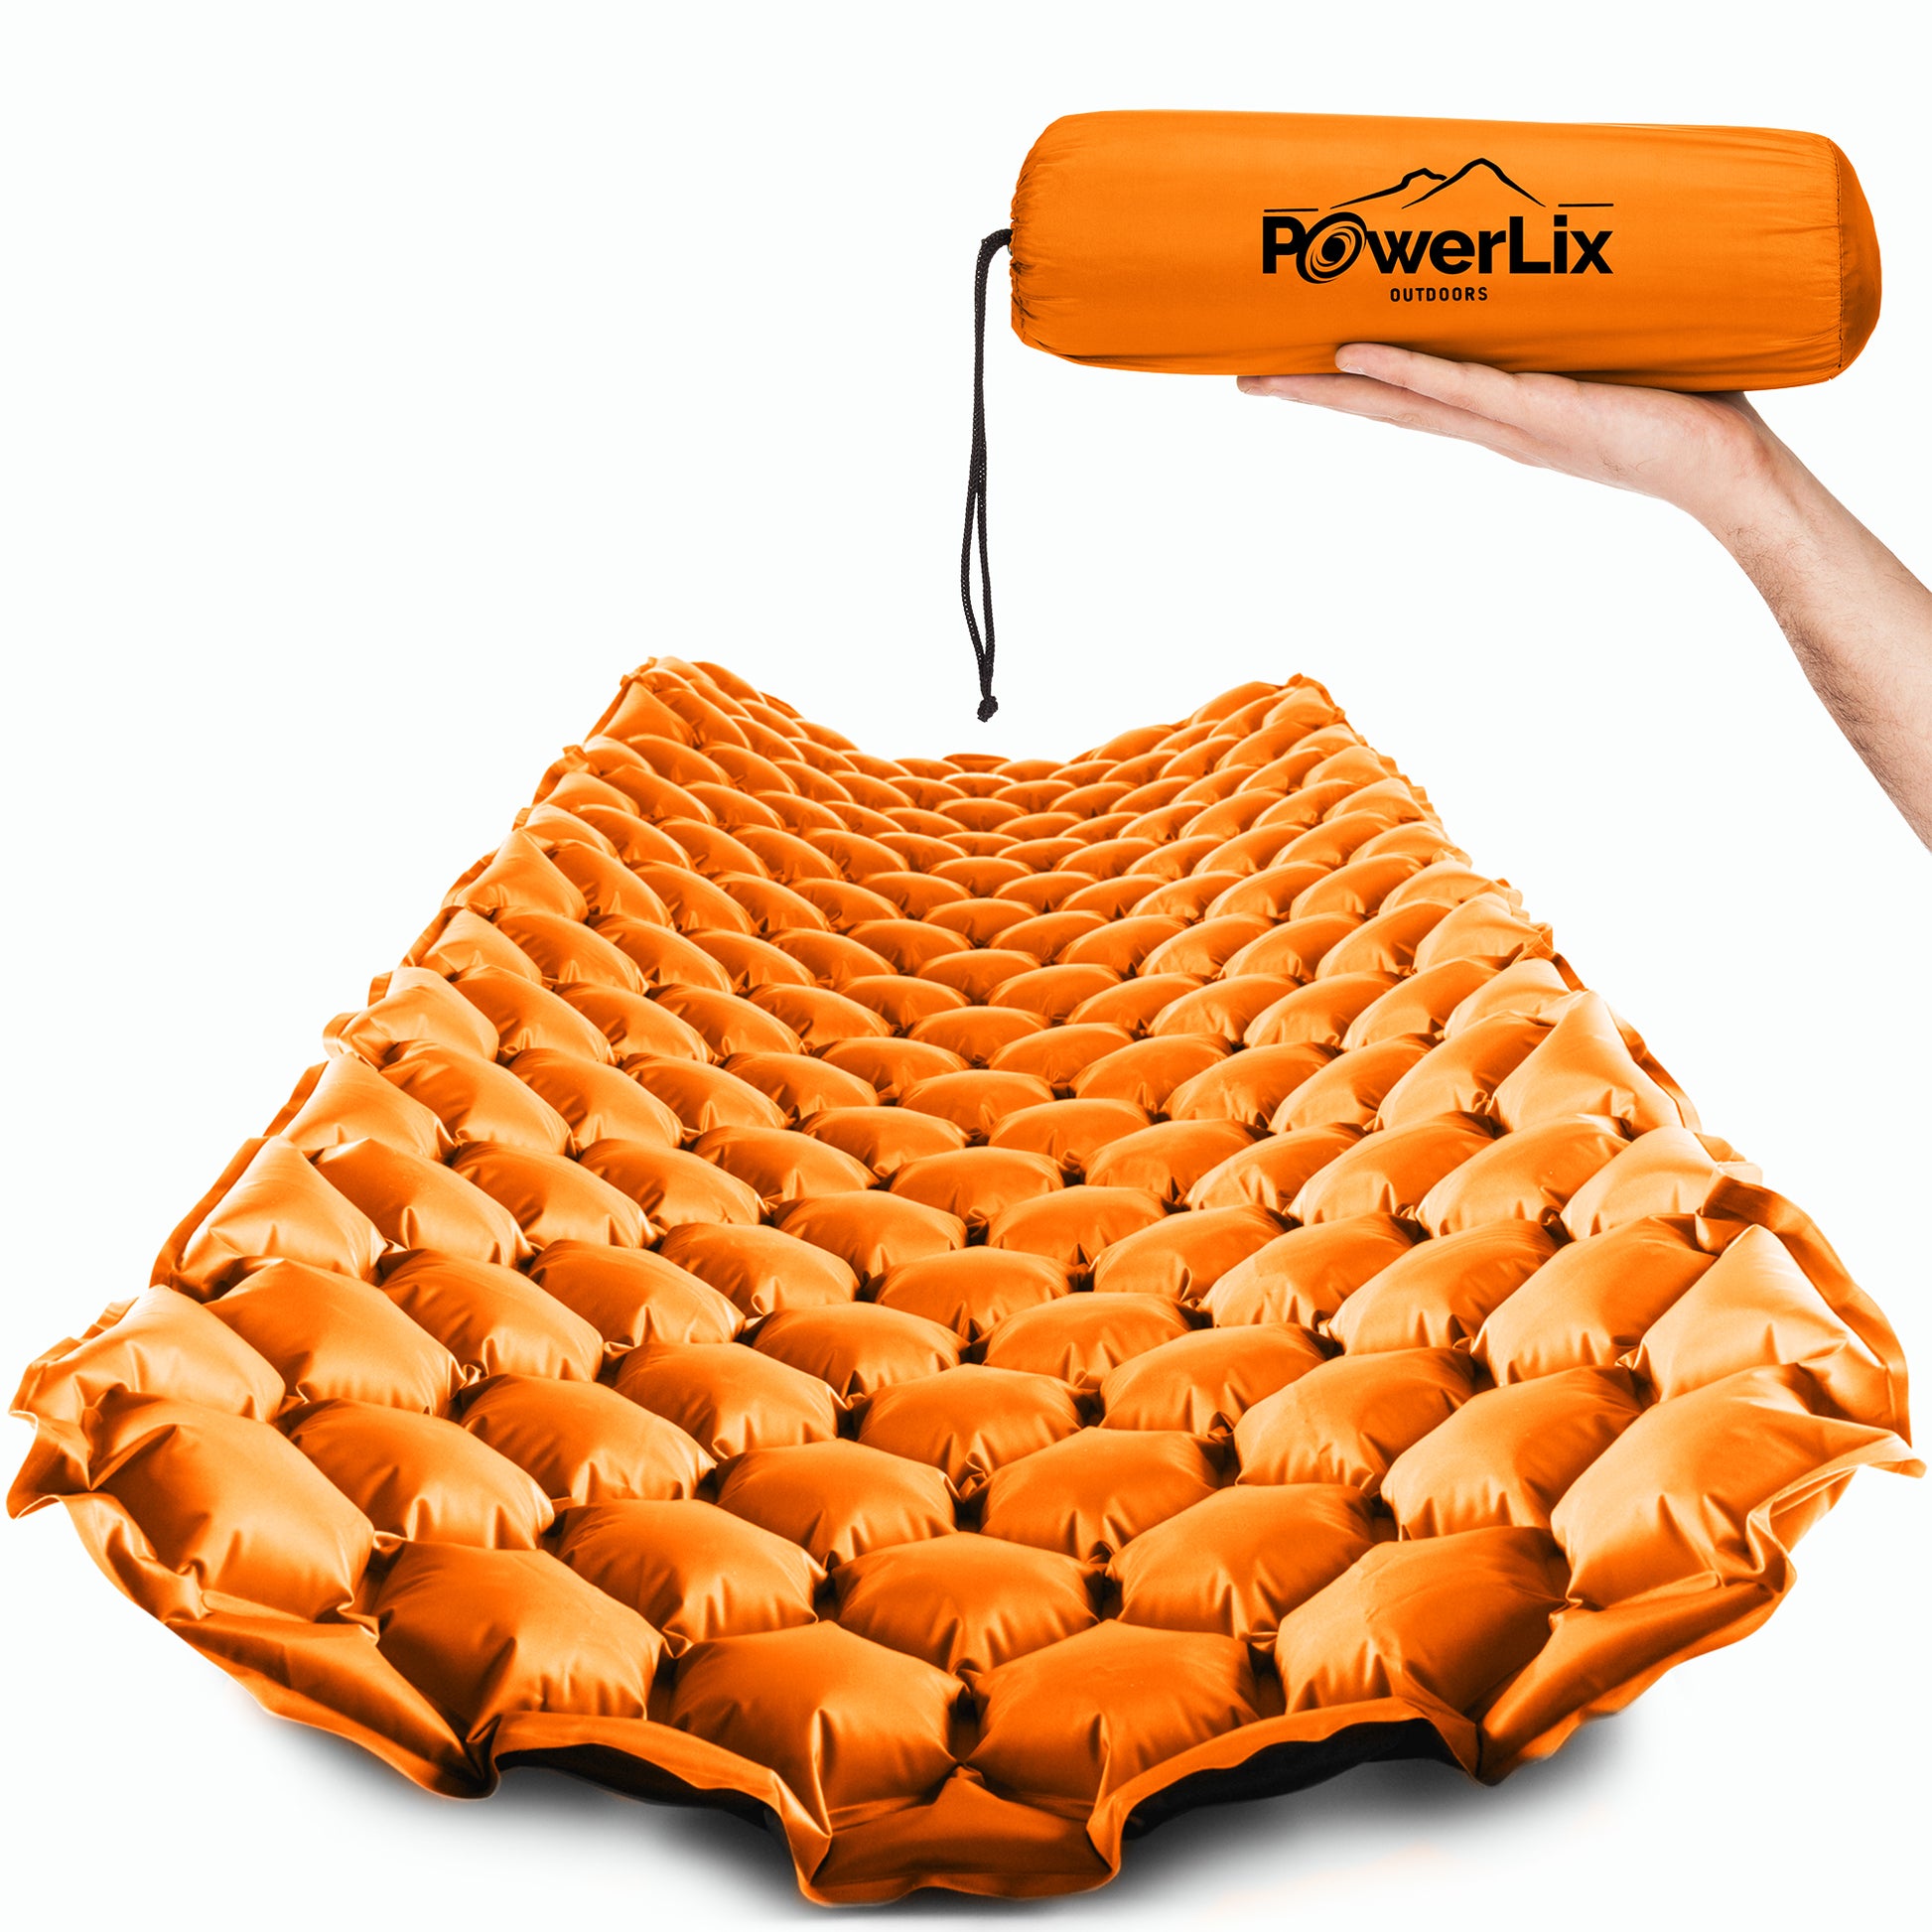 Orange inflated sleeping pad, also show stored in the Powerlix Outdoors bag, held by a hand.